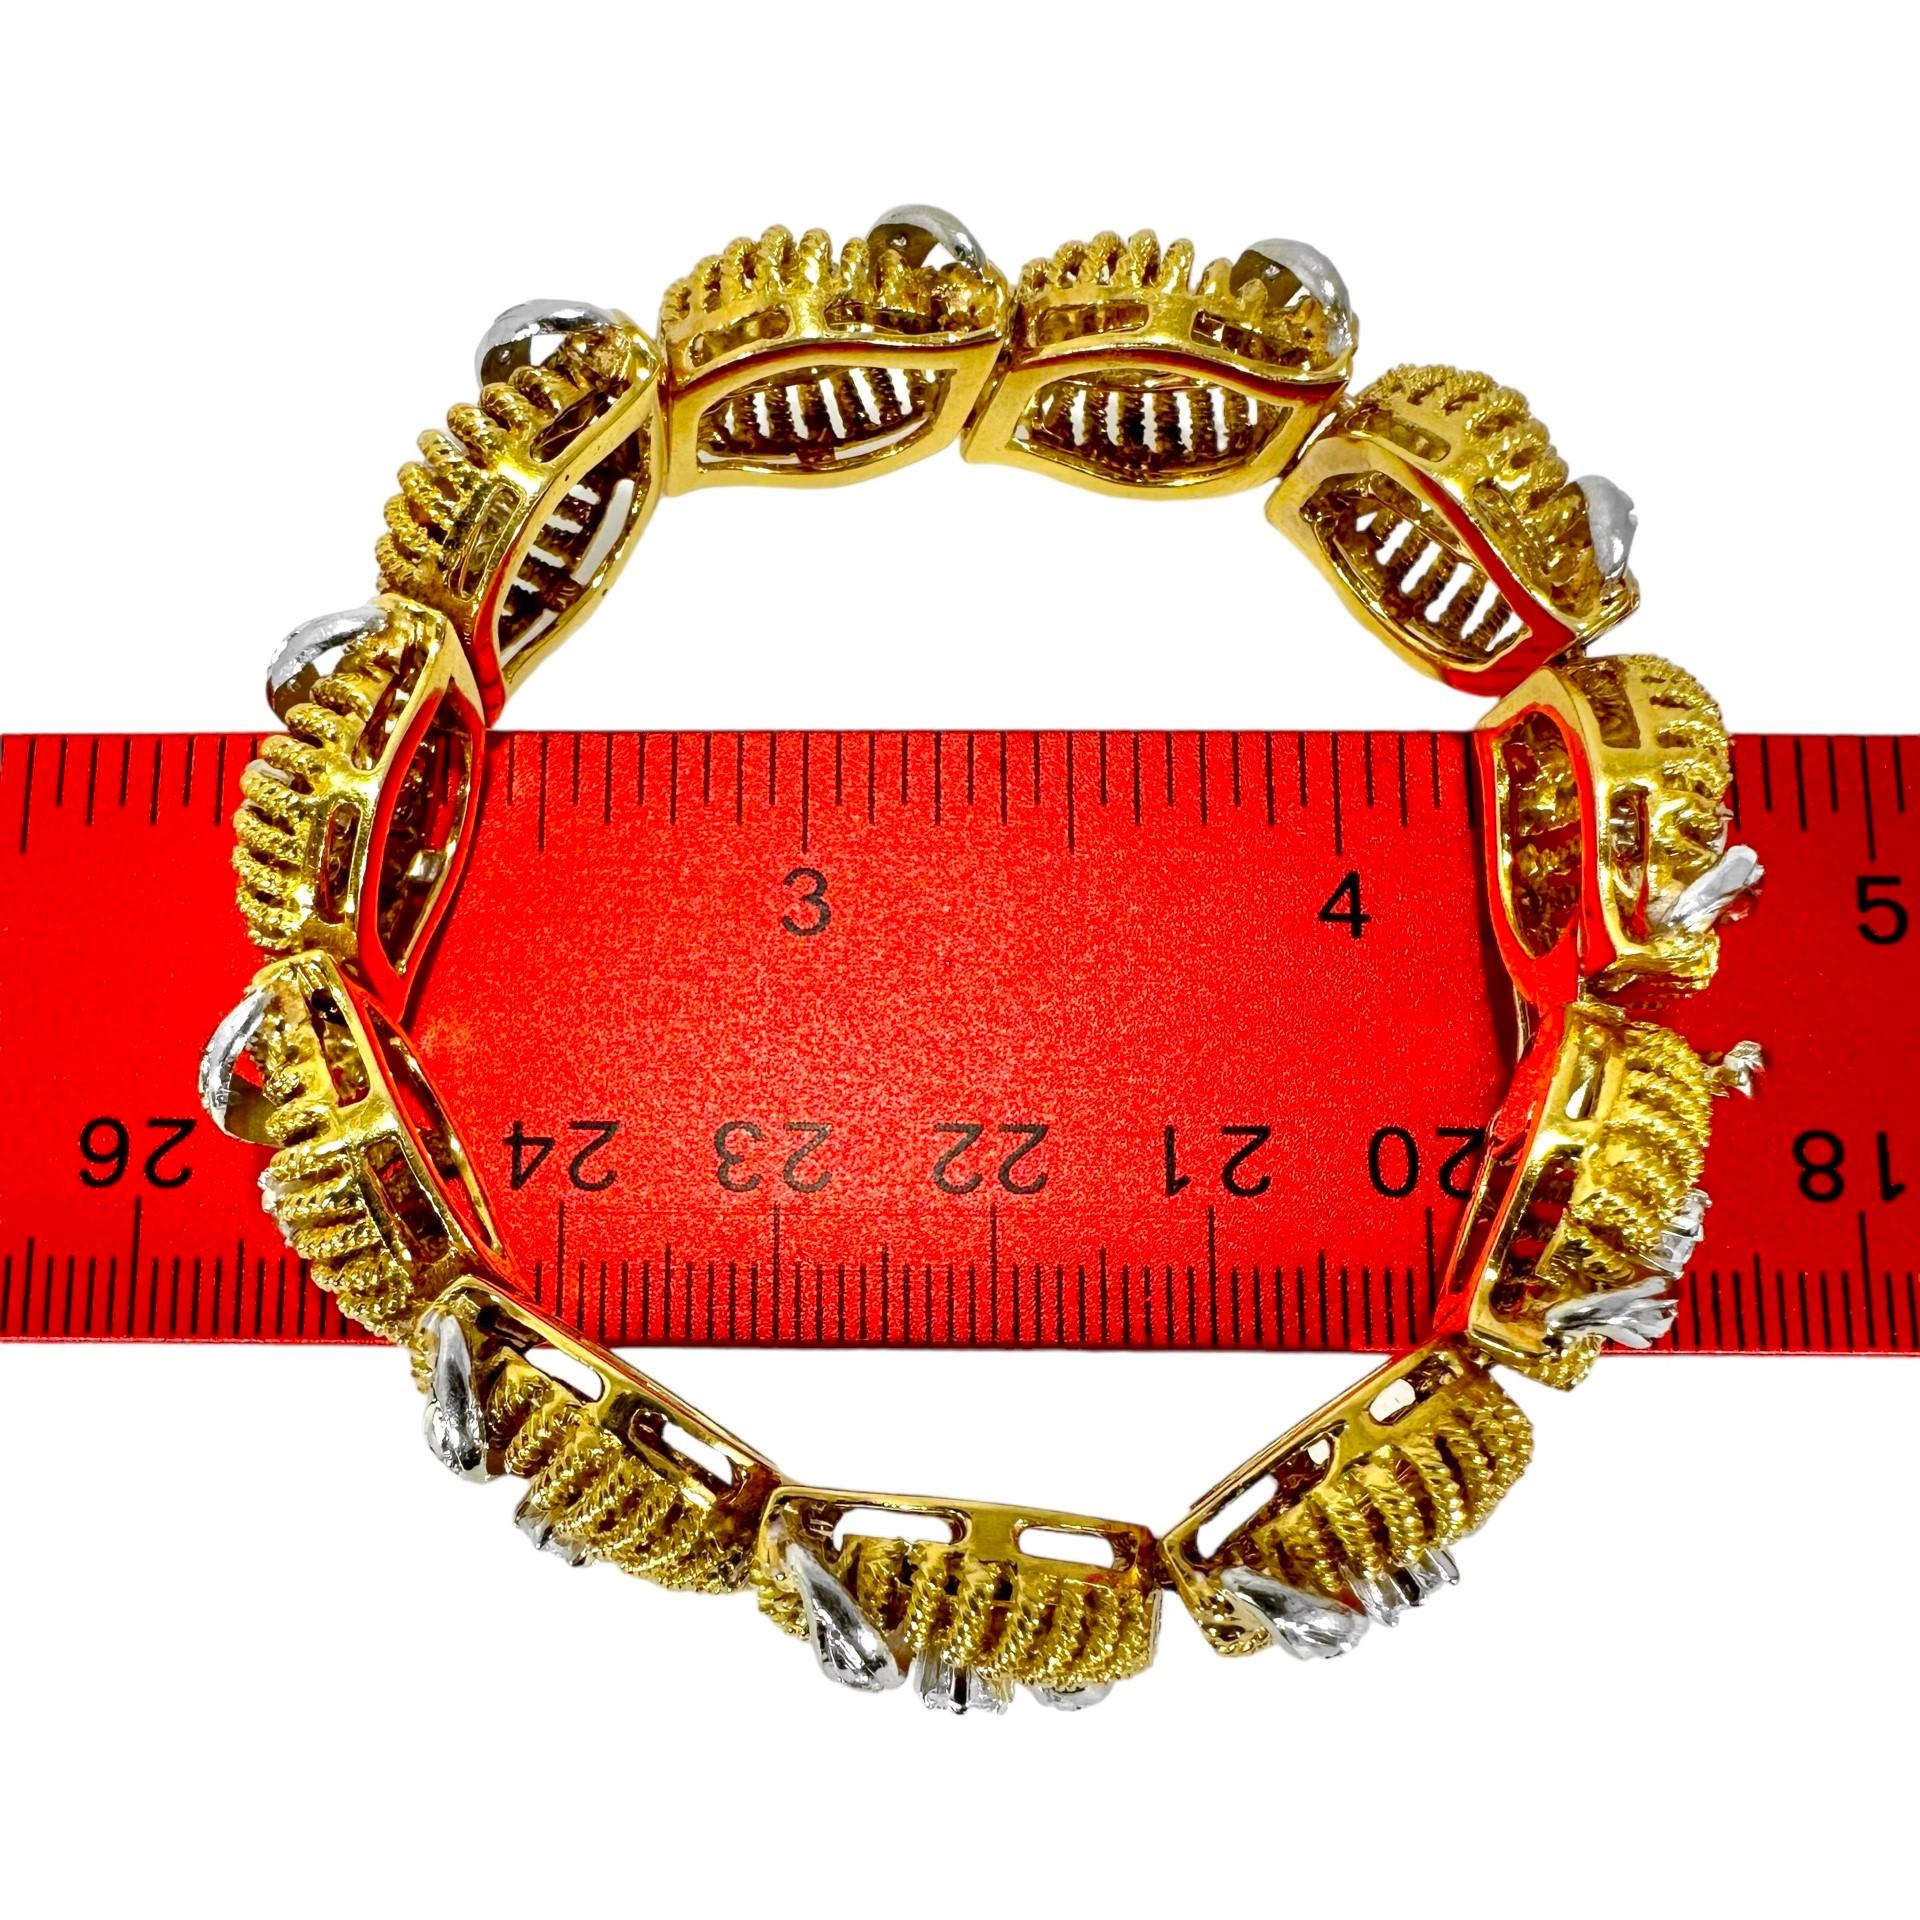 Brilliant Cut Hand Crafted 18K Mid-20th Century Gold and Diamond Cocktail Bracelet